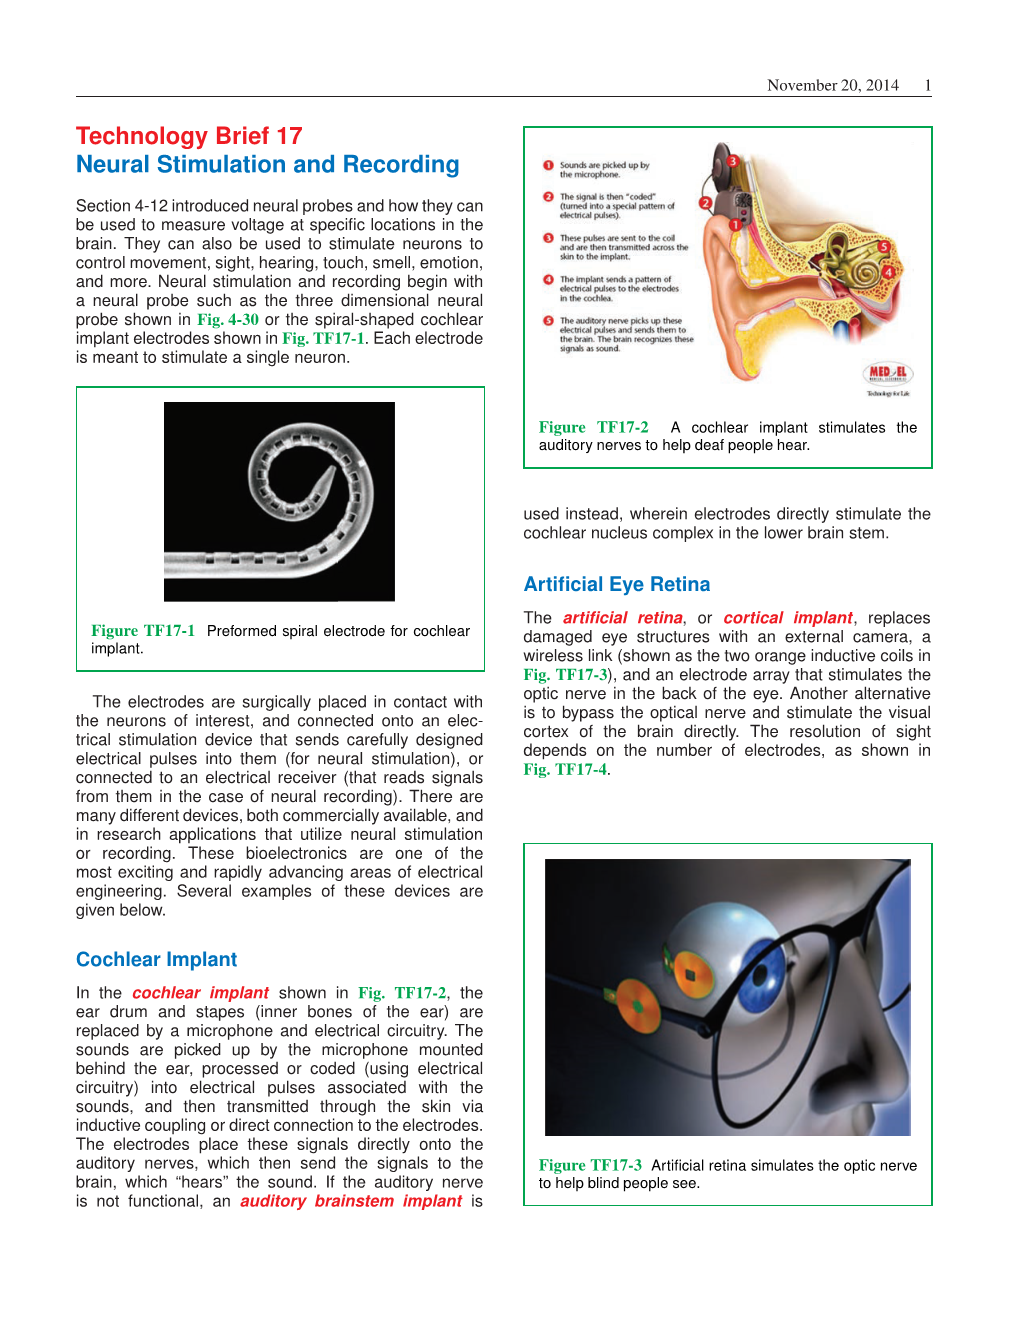 Technology Brief 17 Neural Stimulation and Recording